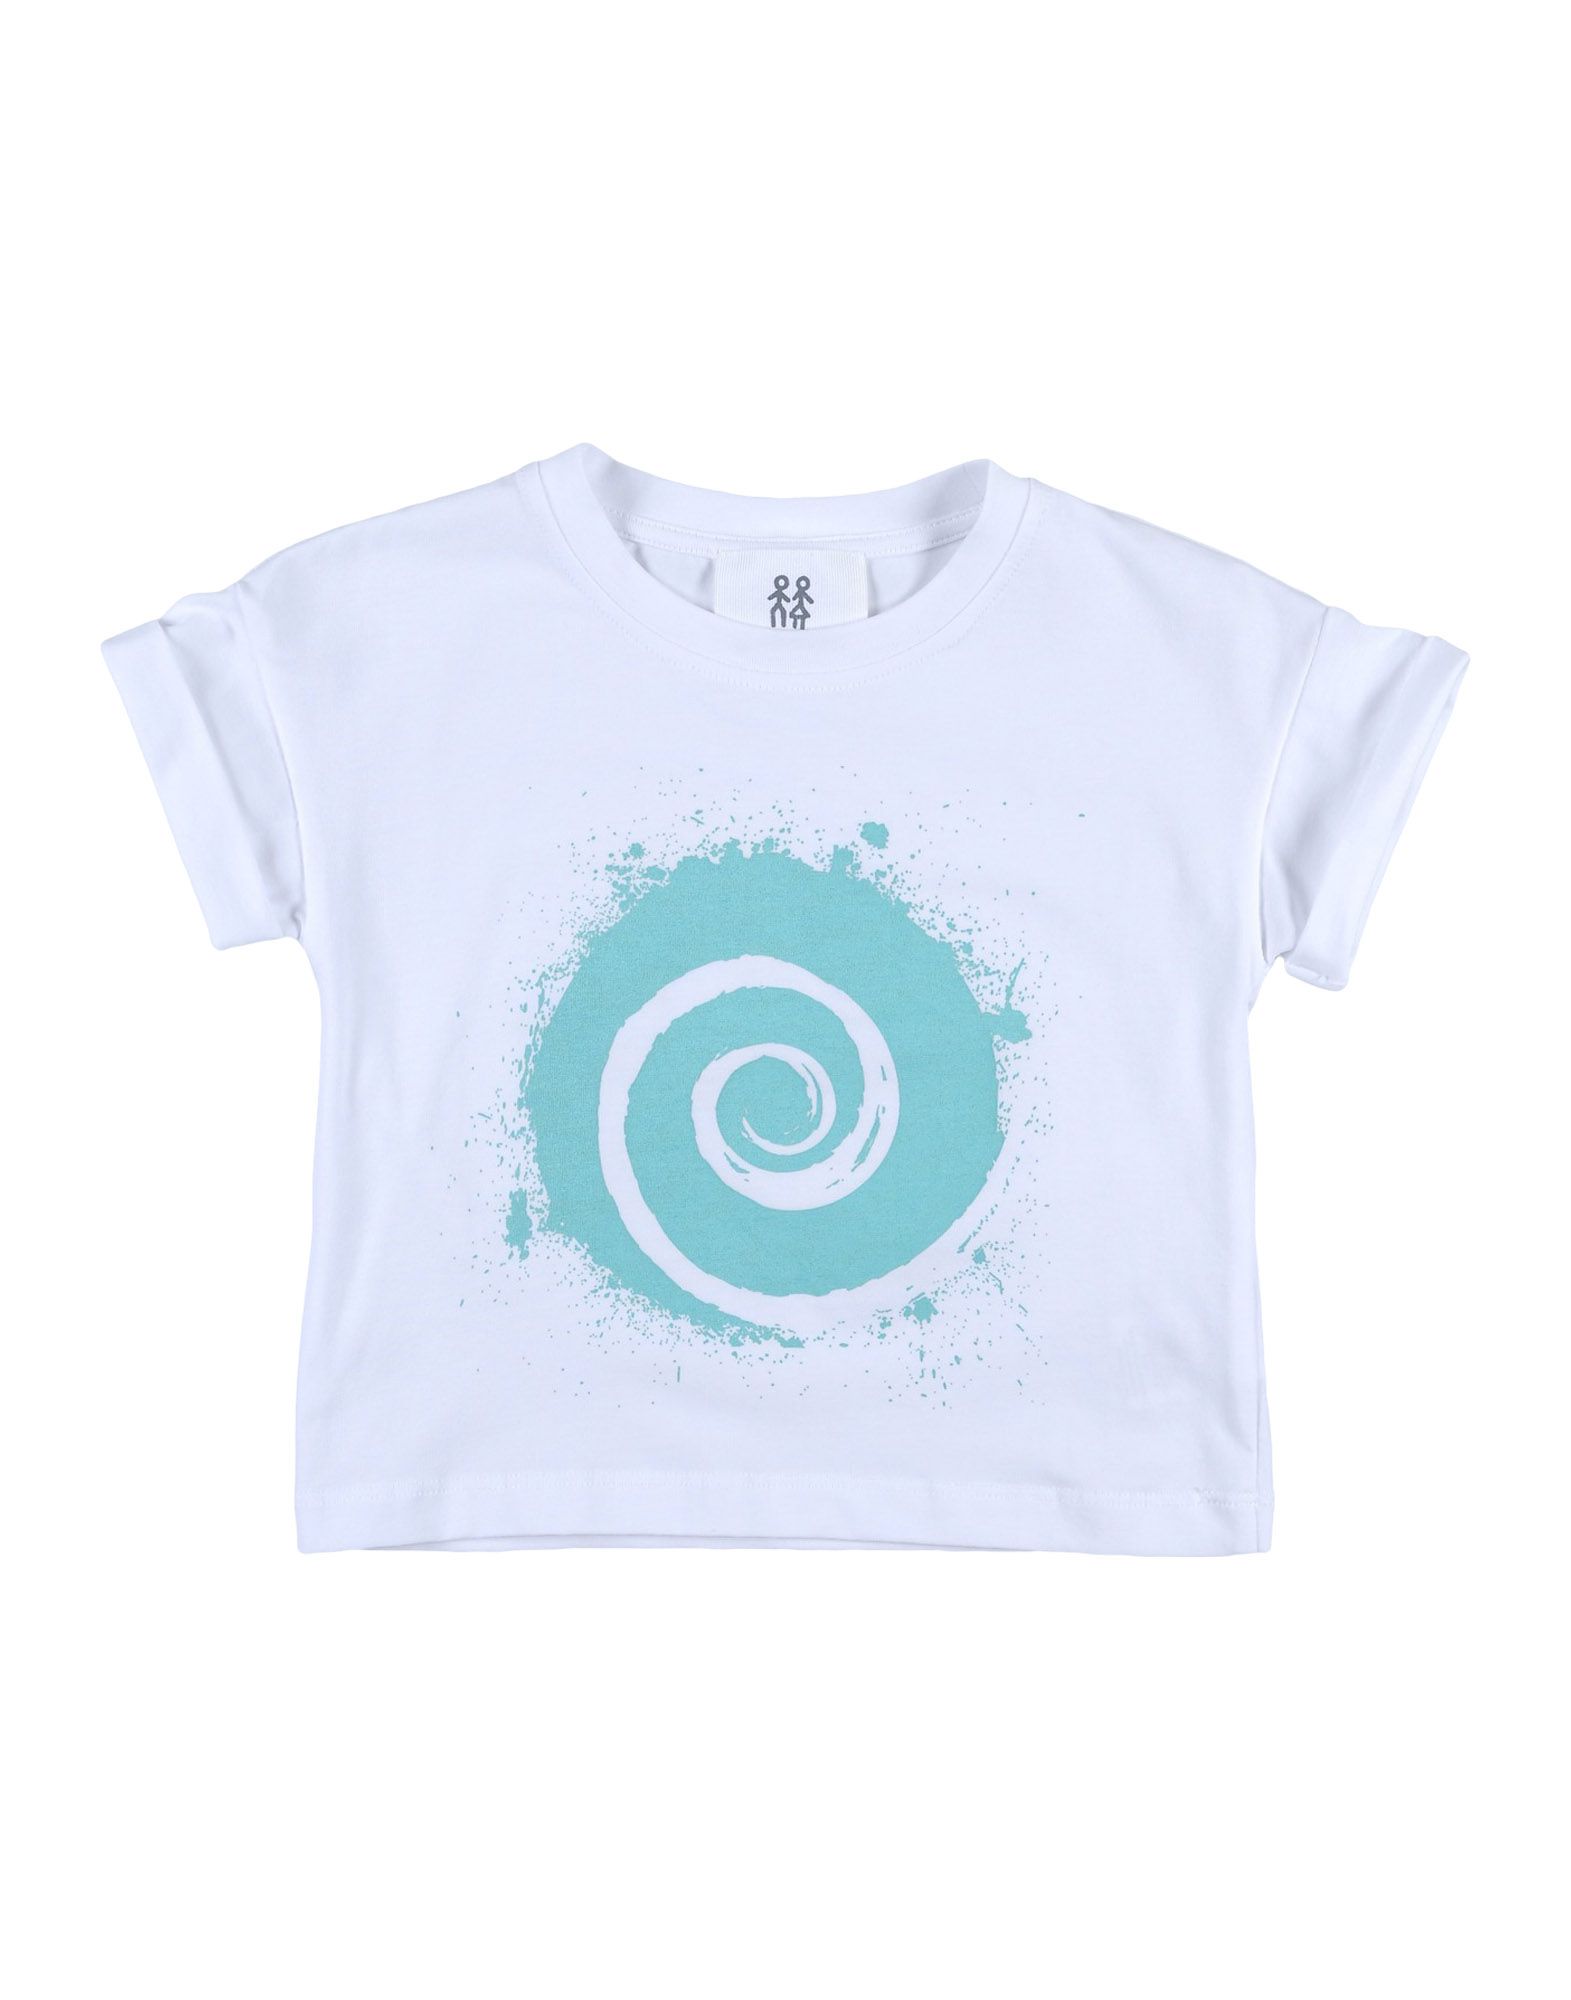 Dreamers Kids' T-shirts In Turquoise